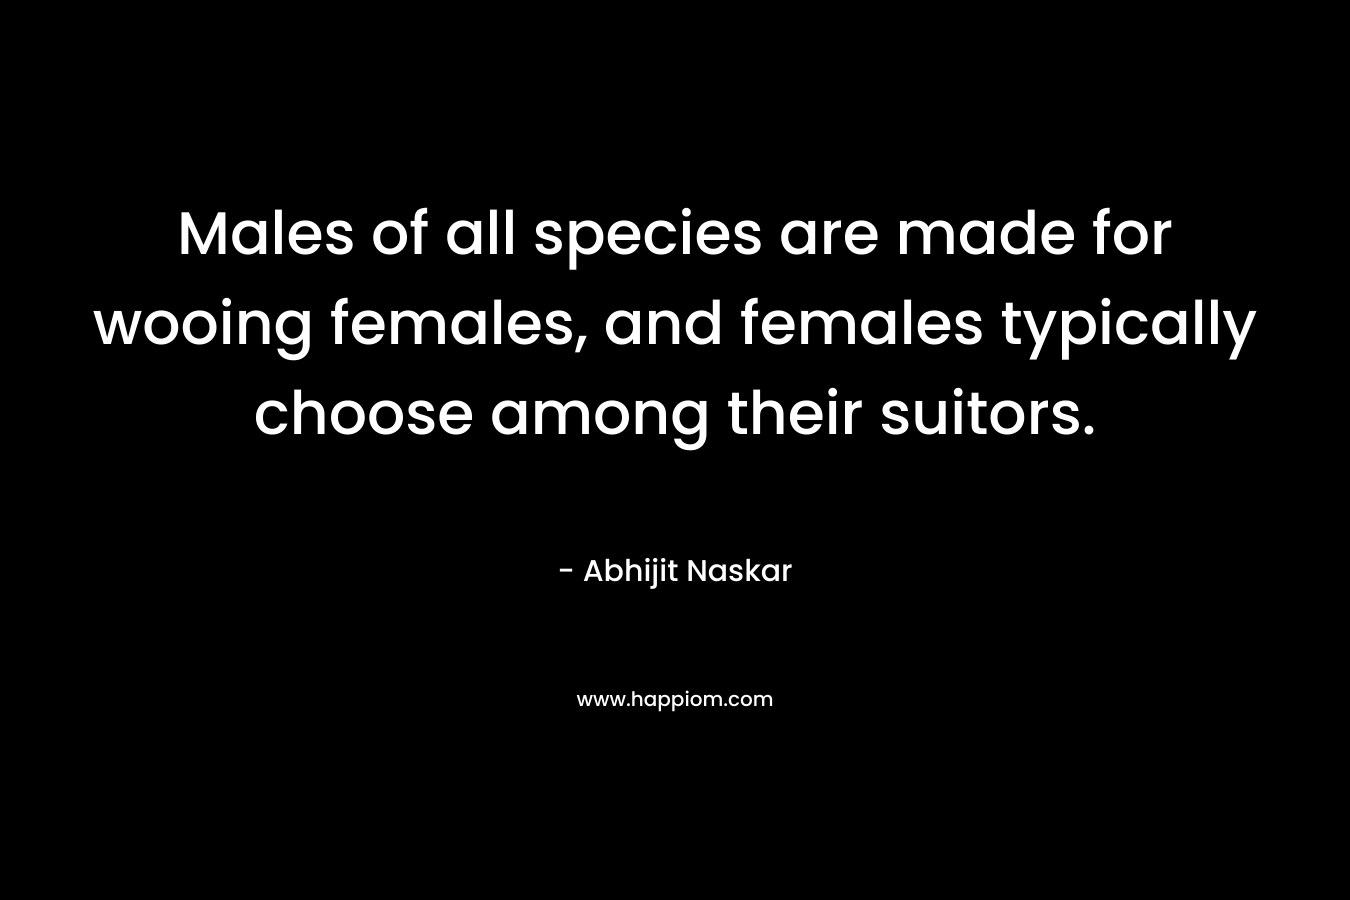 Males of all species are made for wooing females, and females typically choose among their suitors.